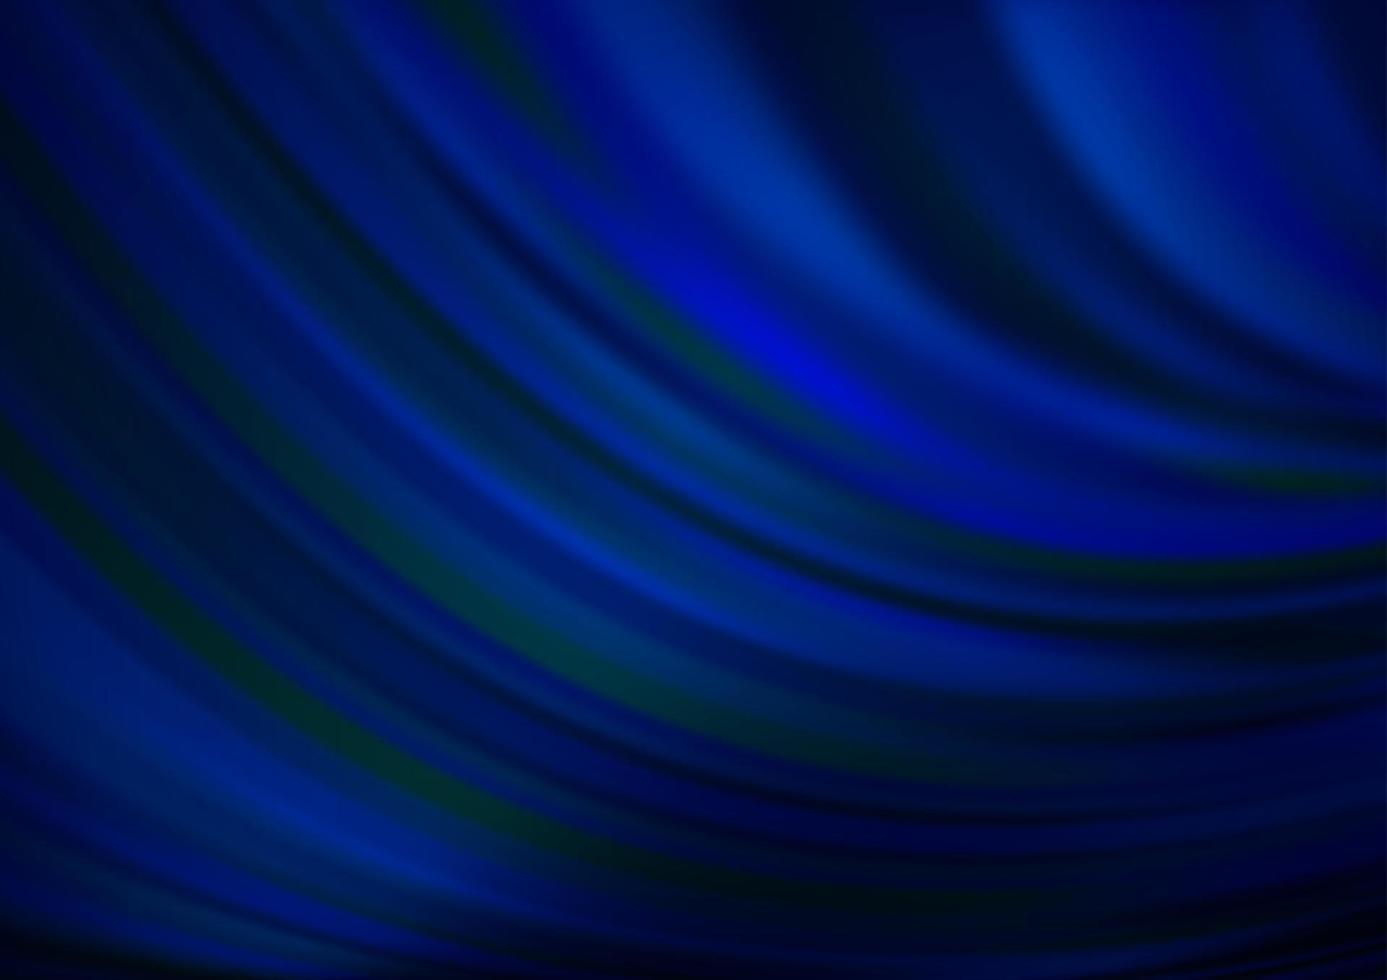 Dark BLUE vector background with curved circles.